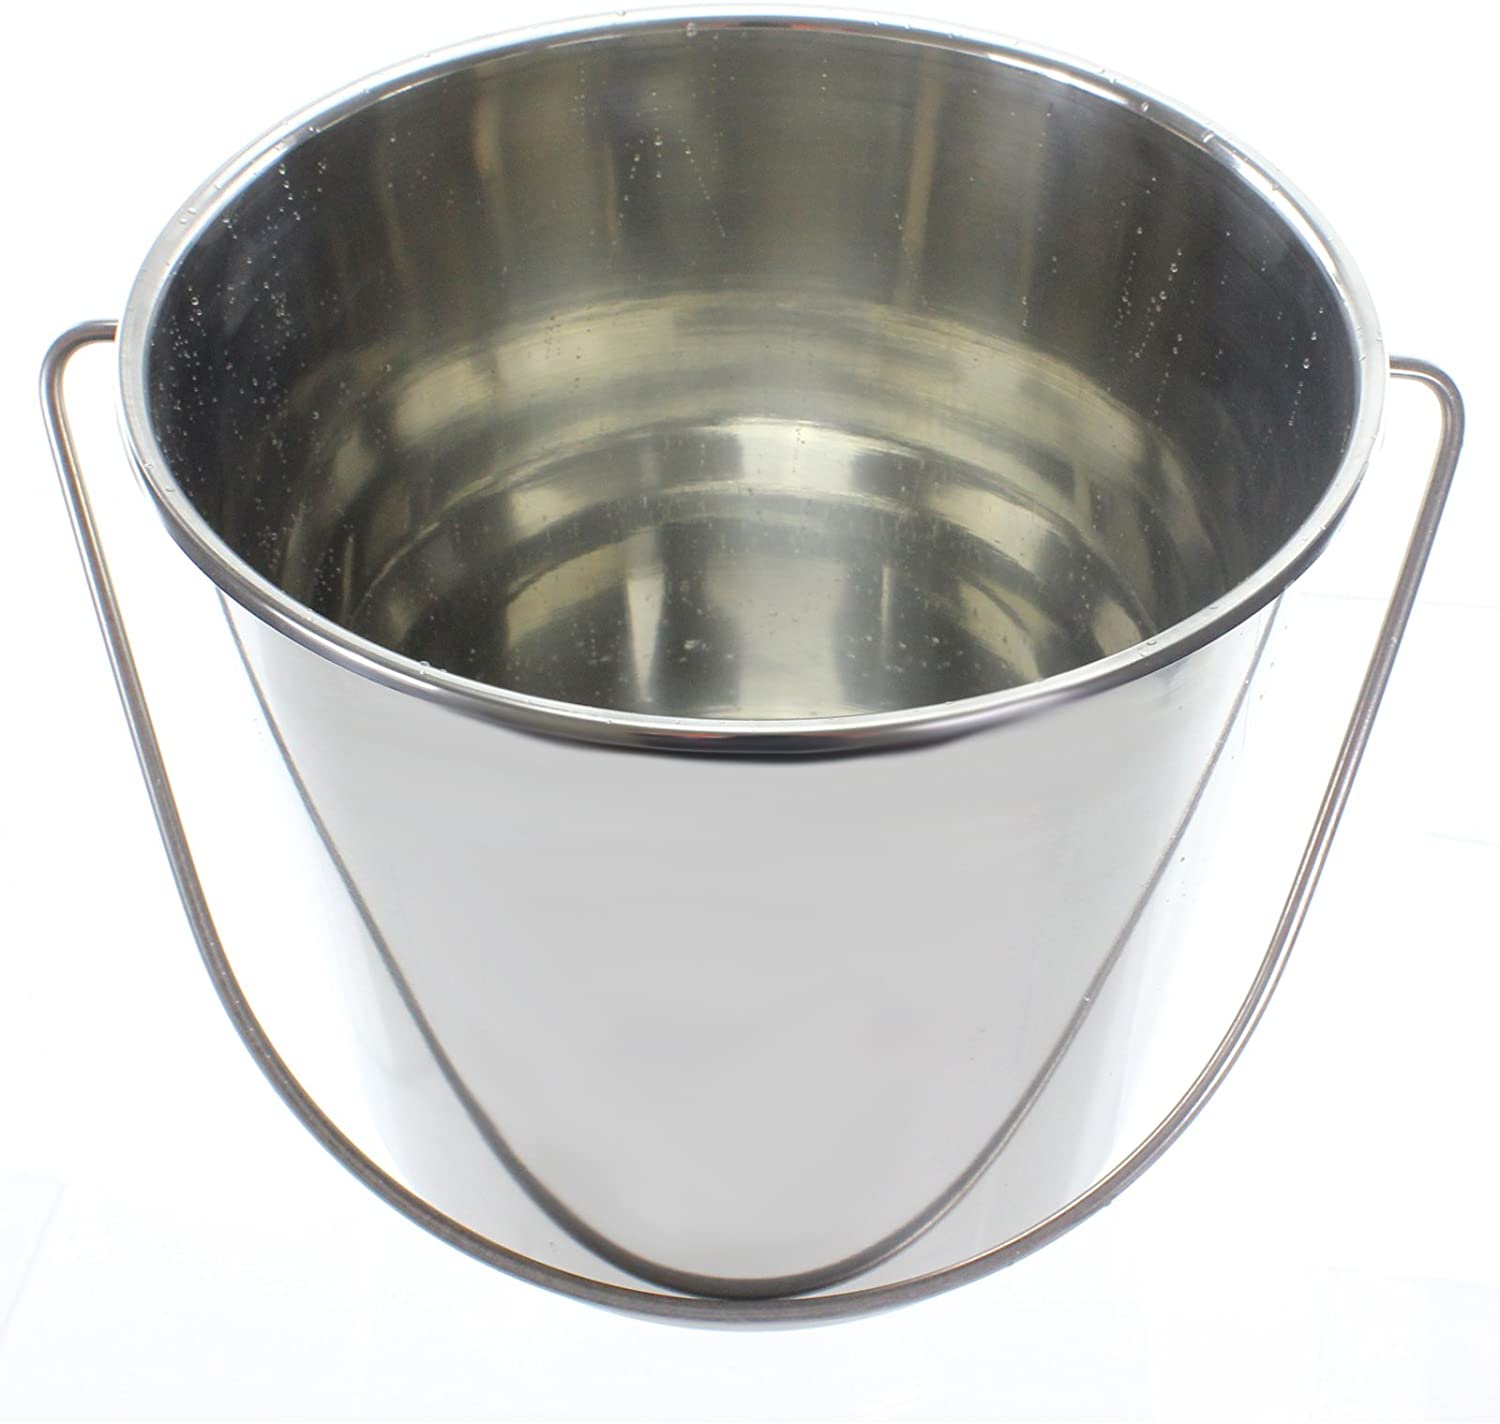 12 Litre Stainless Steel Handled Pail Bucket for BBQ / Barbecue (Silver, Set of 5 Buckets)